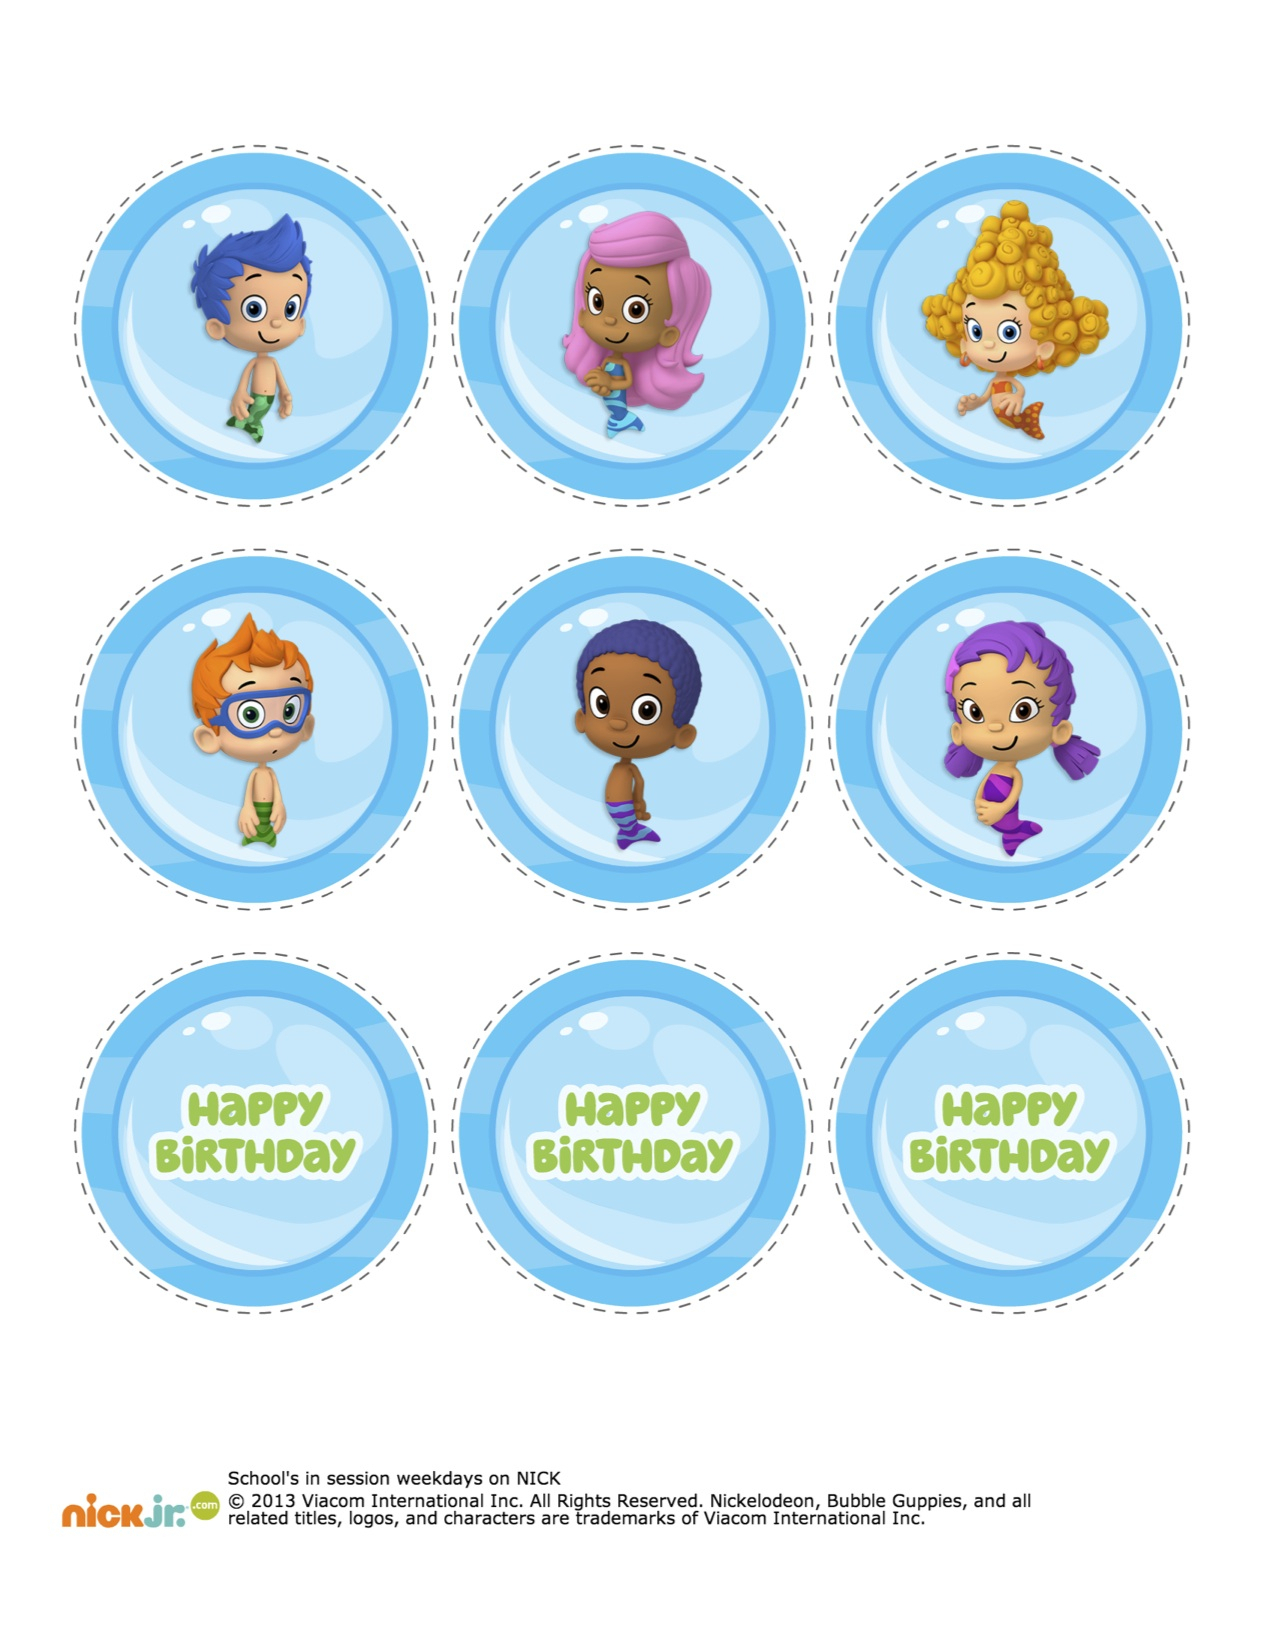 Bubble Guppies Birthday Banner Template – Atlantaauctionco Intended For Bubble Guppies Birthday Banner Template